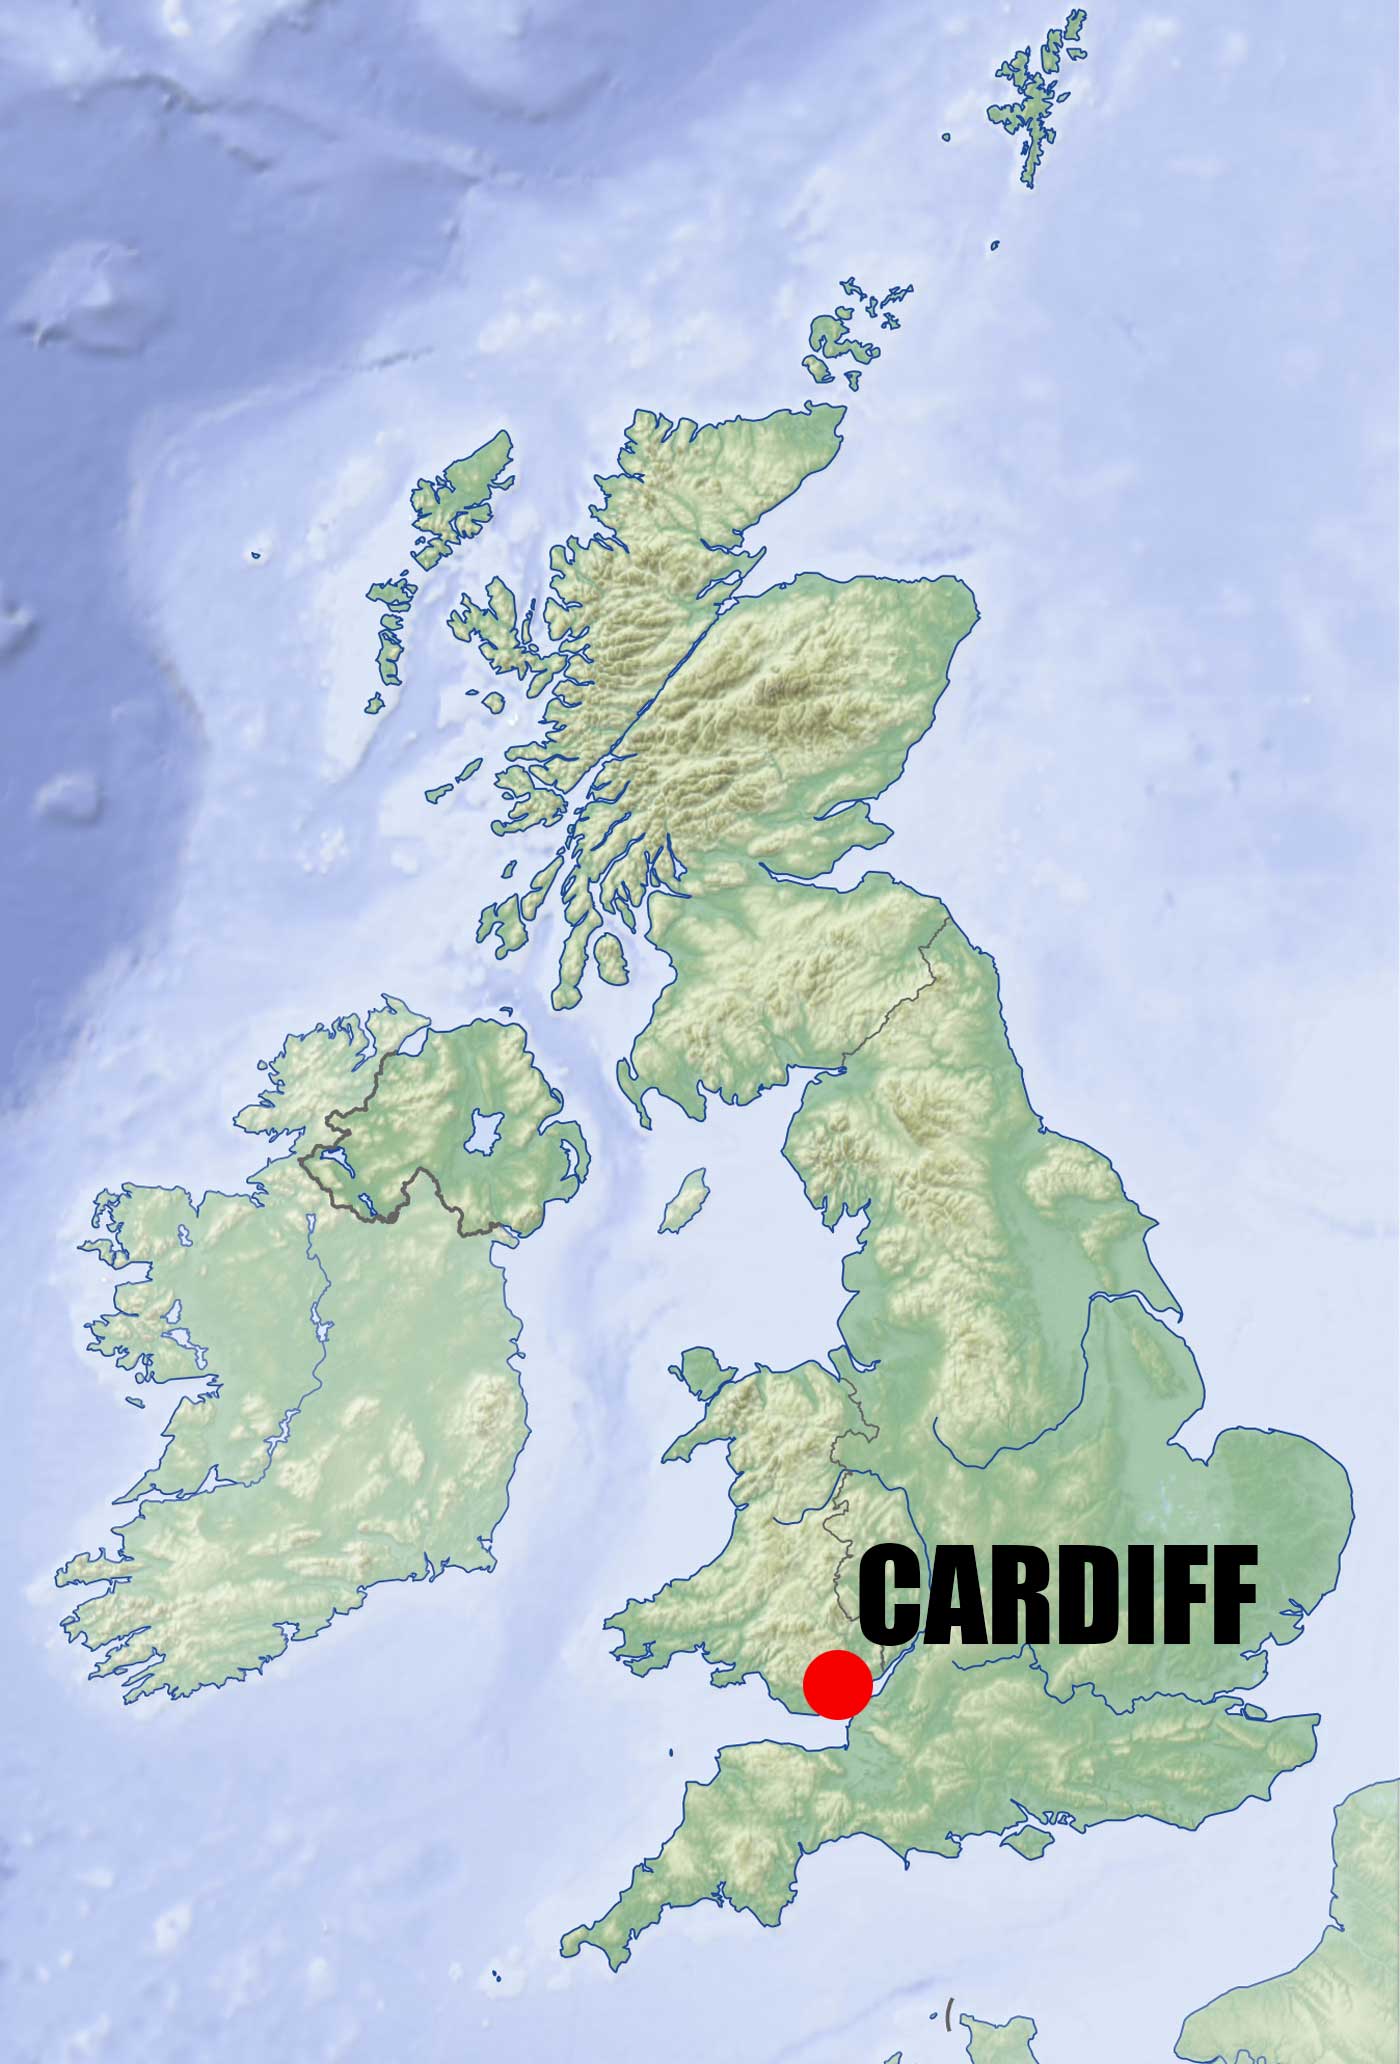 Location of Cardiff City on the United Kingdom and Wales Map